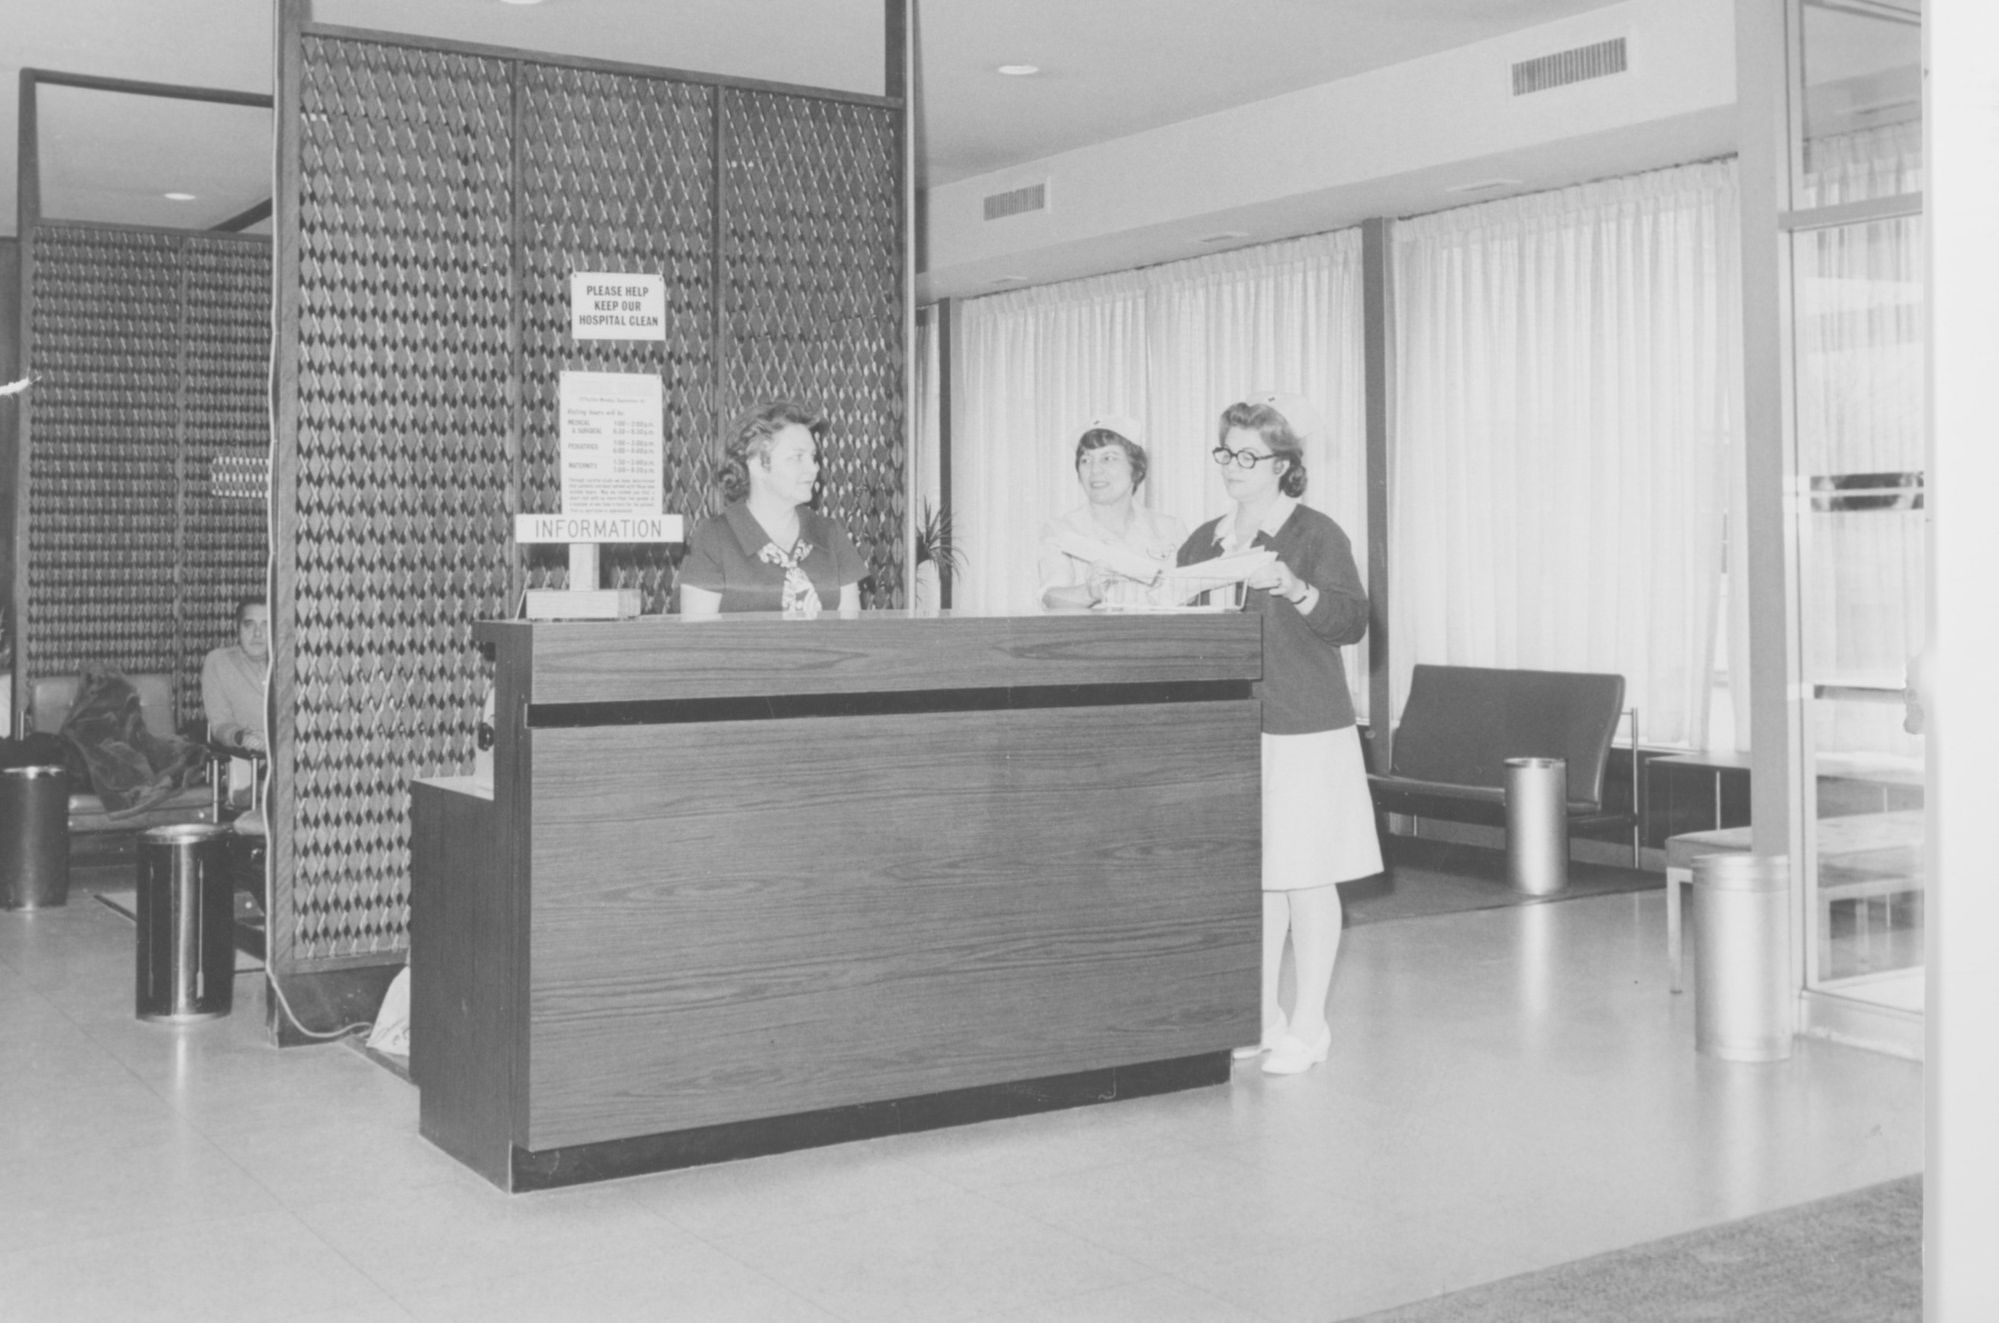 Nurses gather in the original lobby of Franklin Hospital, which first opened in 1963. Over the past 50 years, the building has been expanded and renovated.